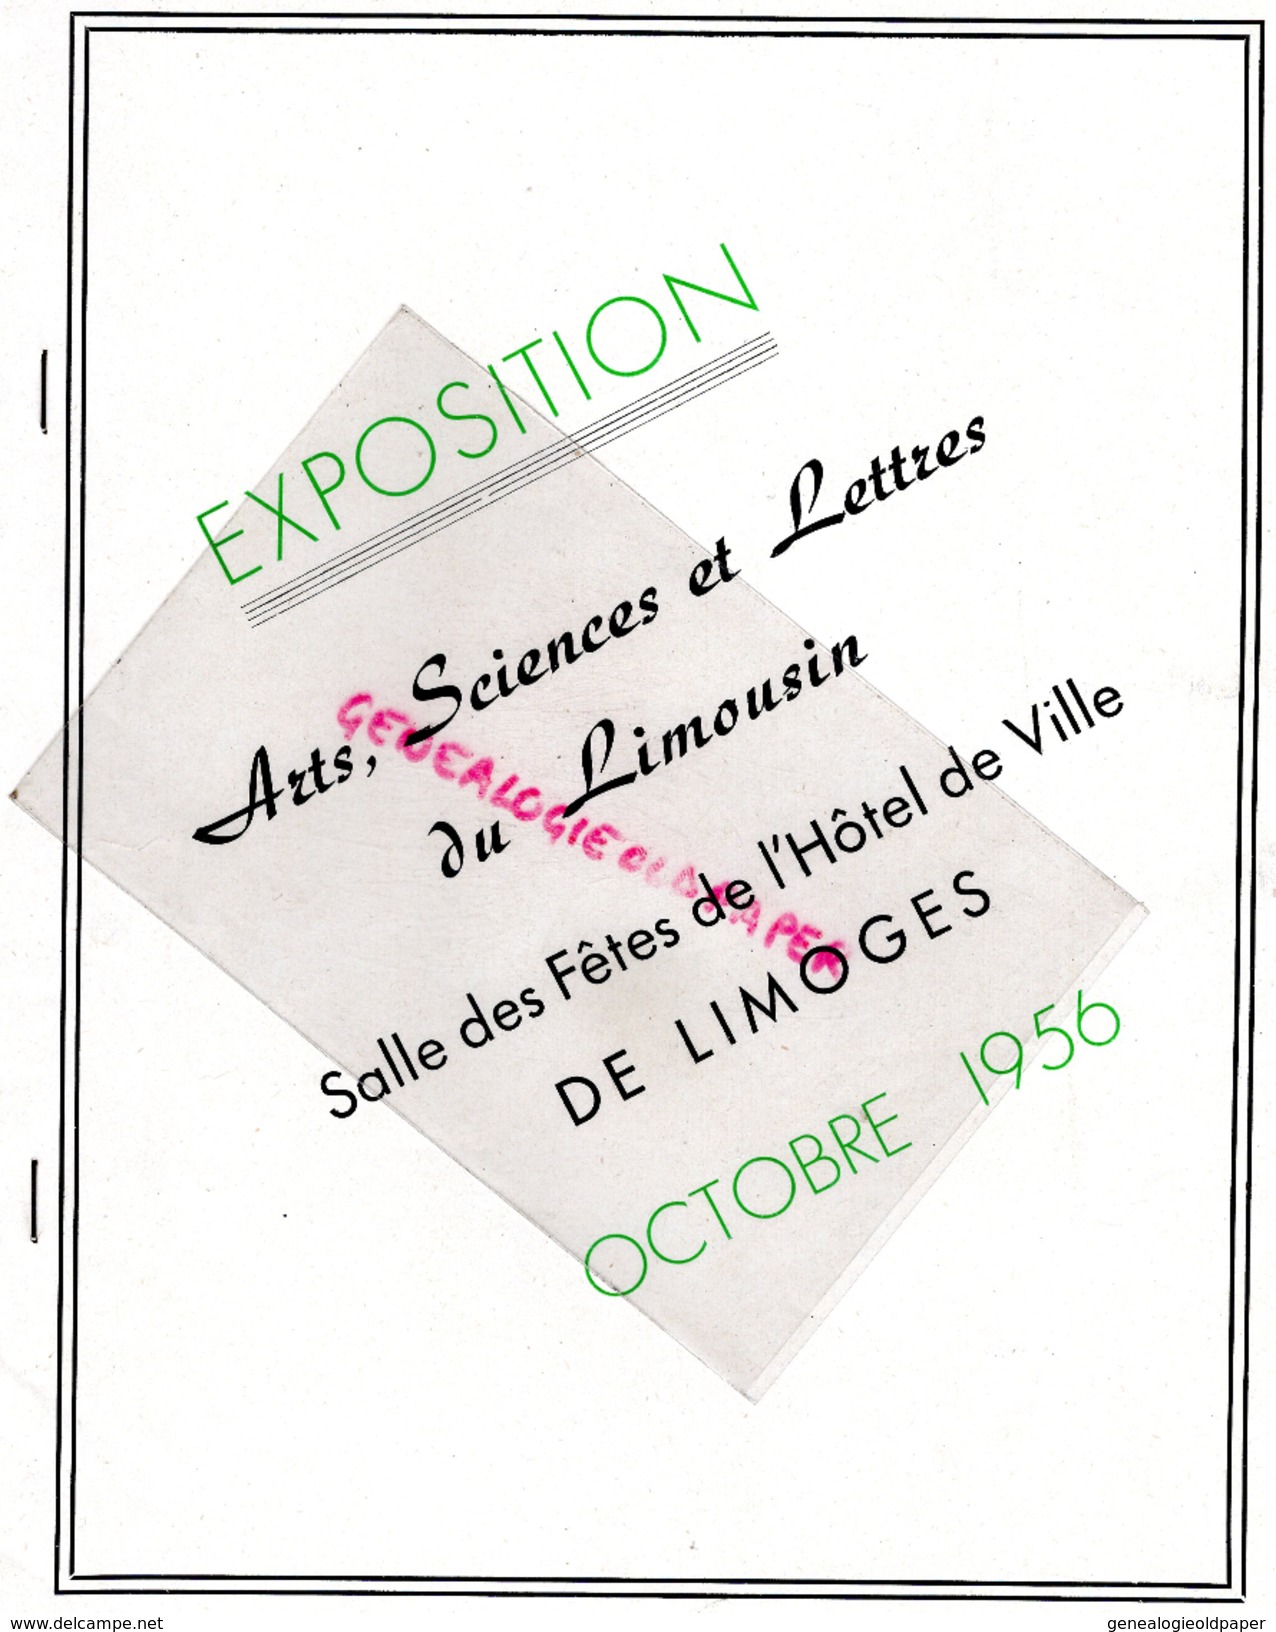 87 - LIMOGES- EXPOSITION ARTS SCIENCES LETTRES LIMOUSIN-HOTEL VILLE-1956-BETOULLE-THARAUD-MARTINAUD-LEOBARDY-MARGERIT - Programme